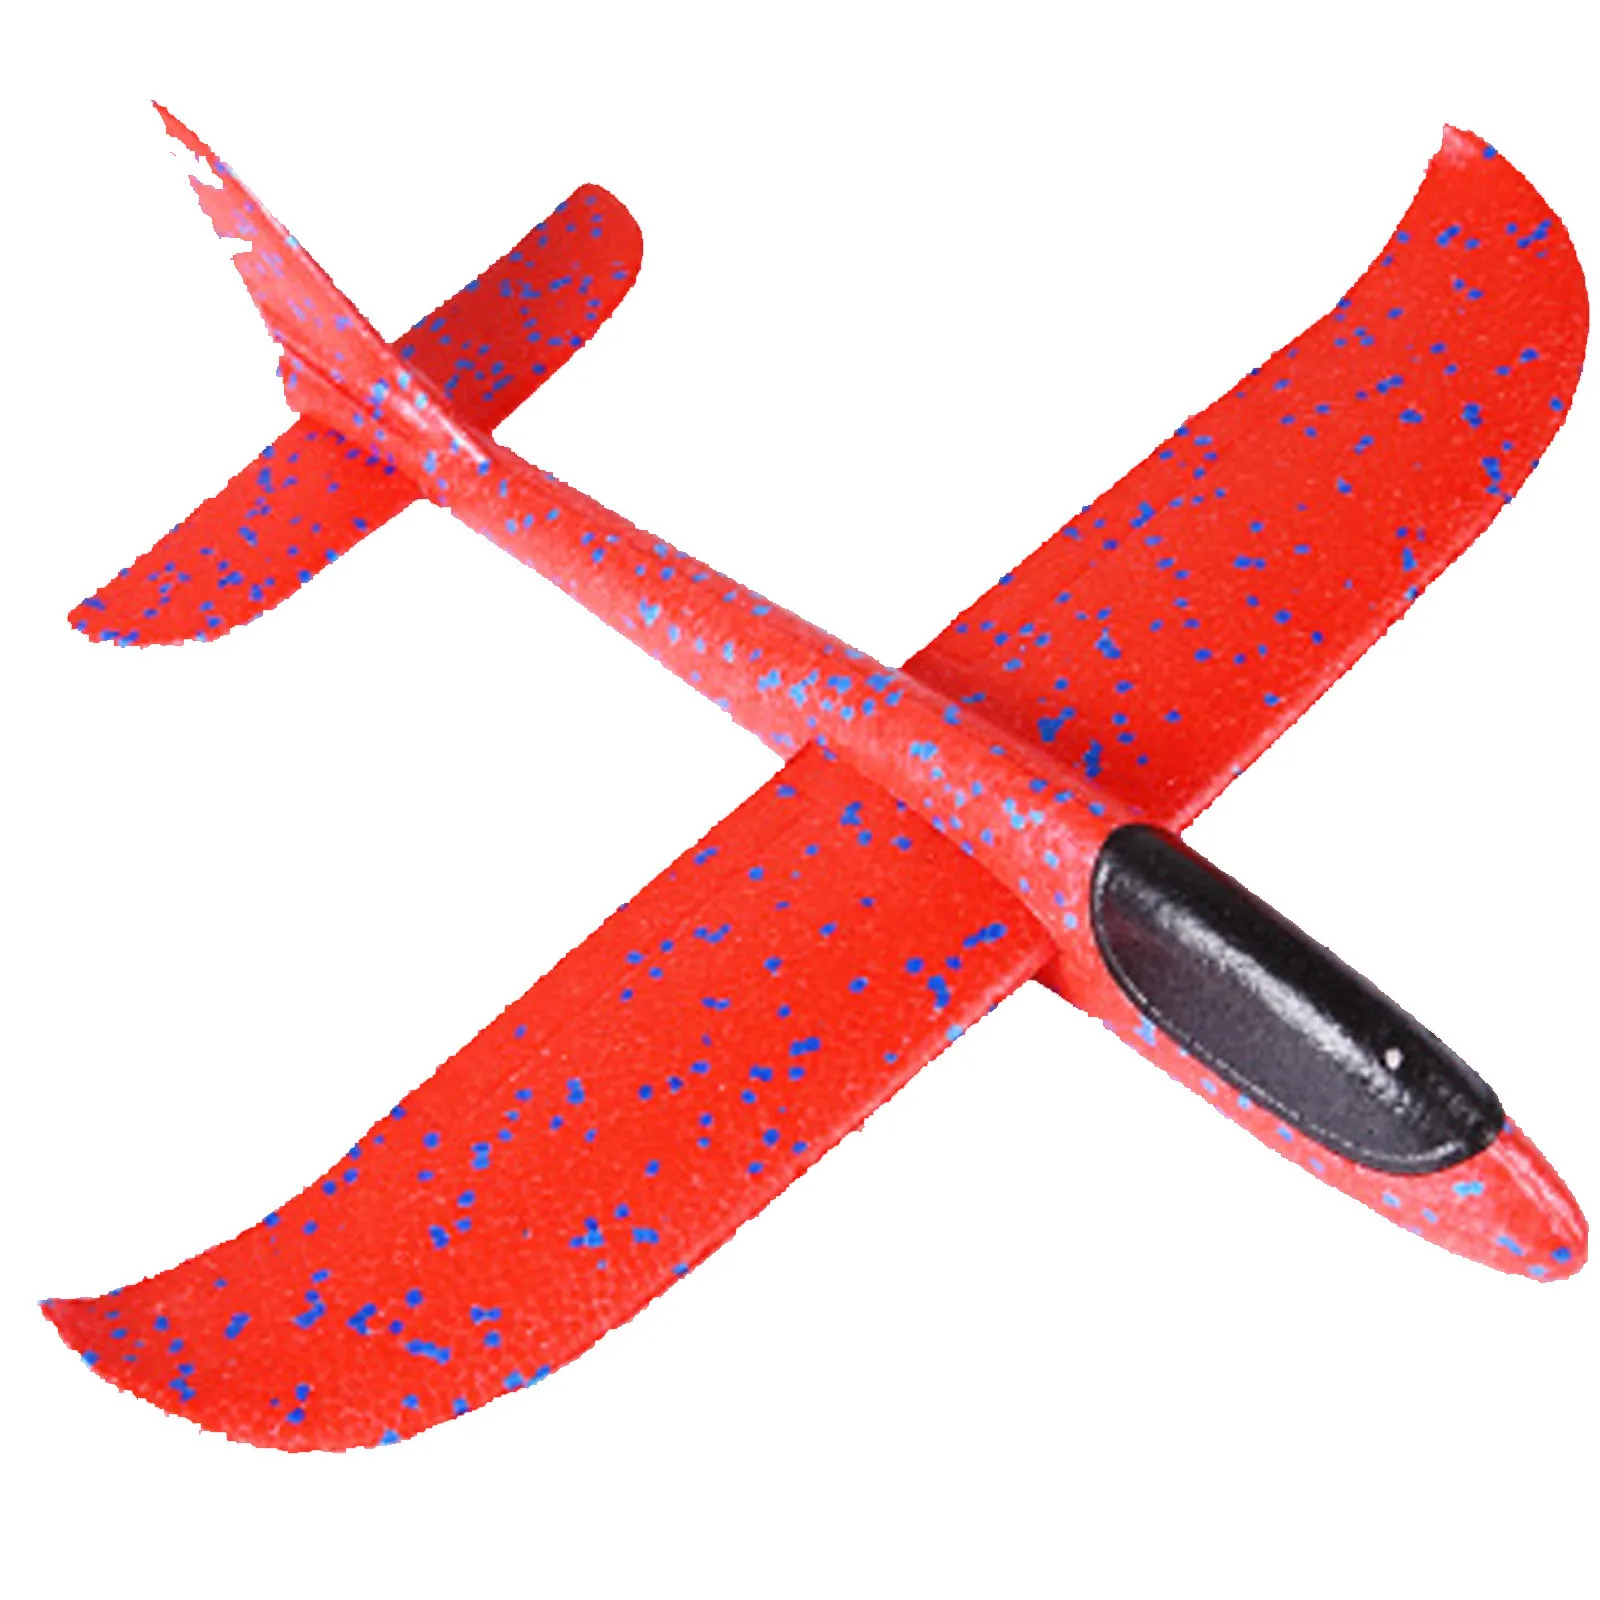 

48cm Big Hand Launch Throwing Foam Palne EPP Airplane Model Glider Plane Aircraft Model Outdoor DIY Educational Toy For Children